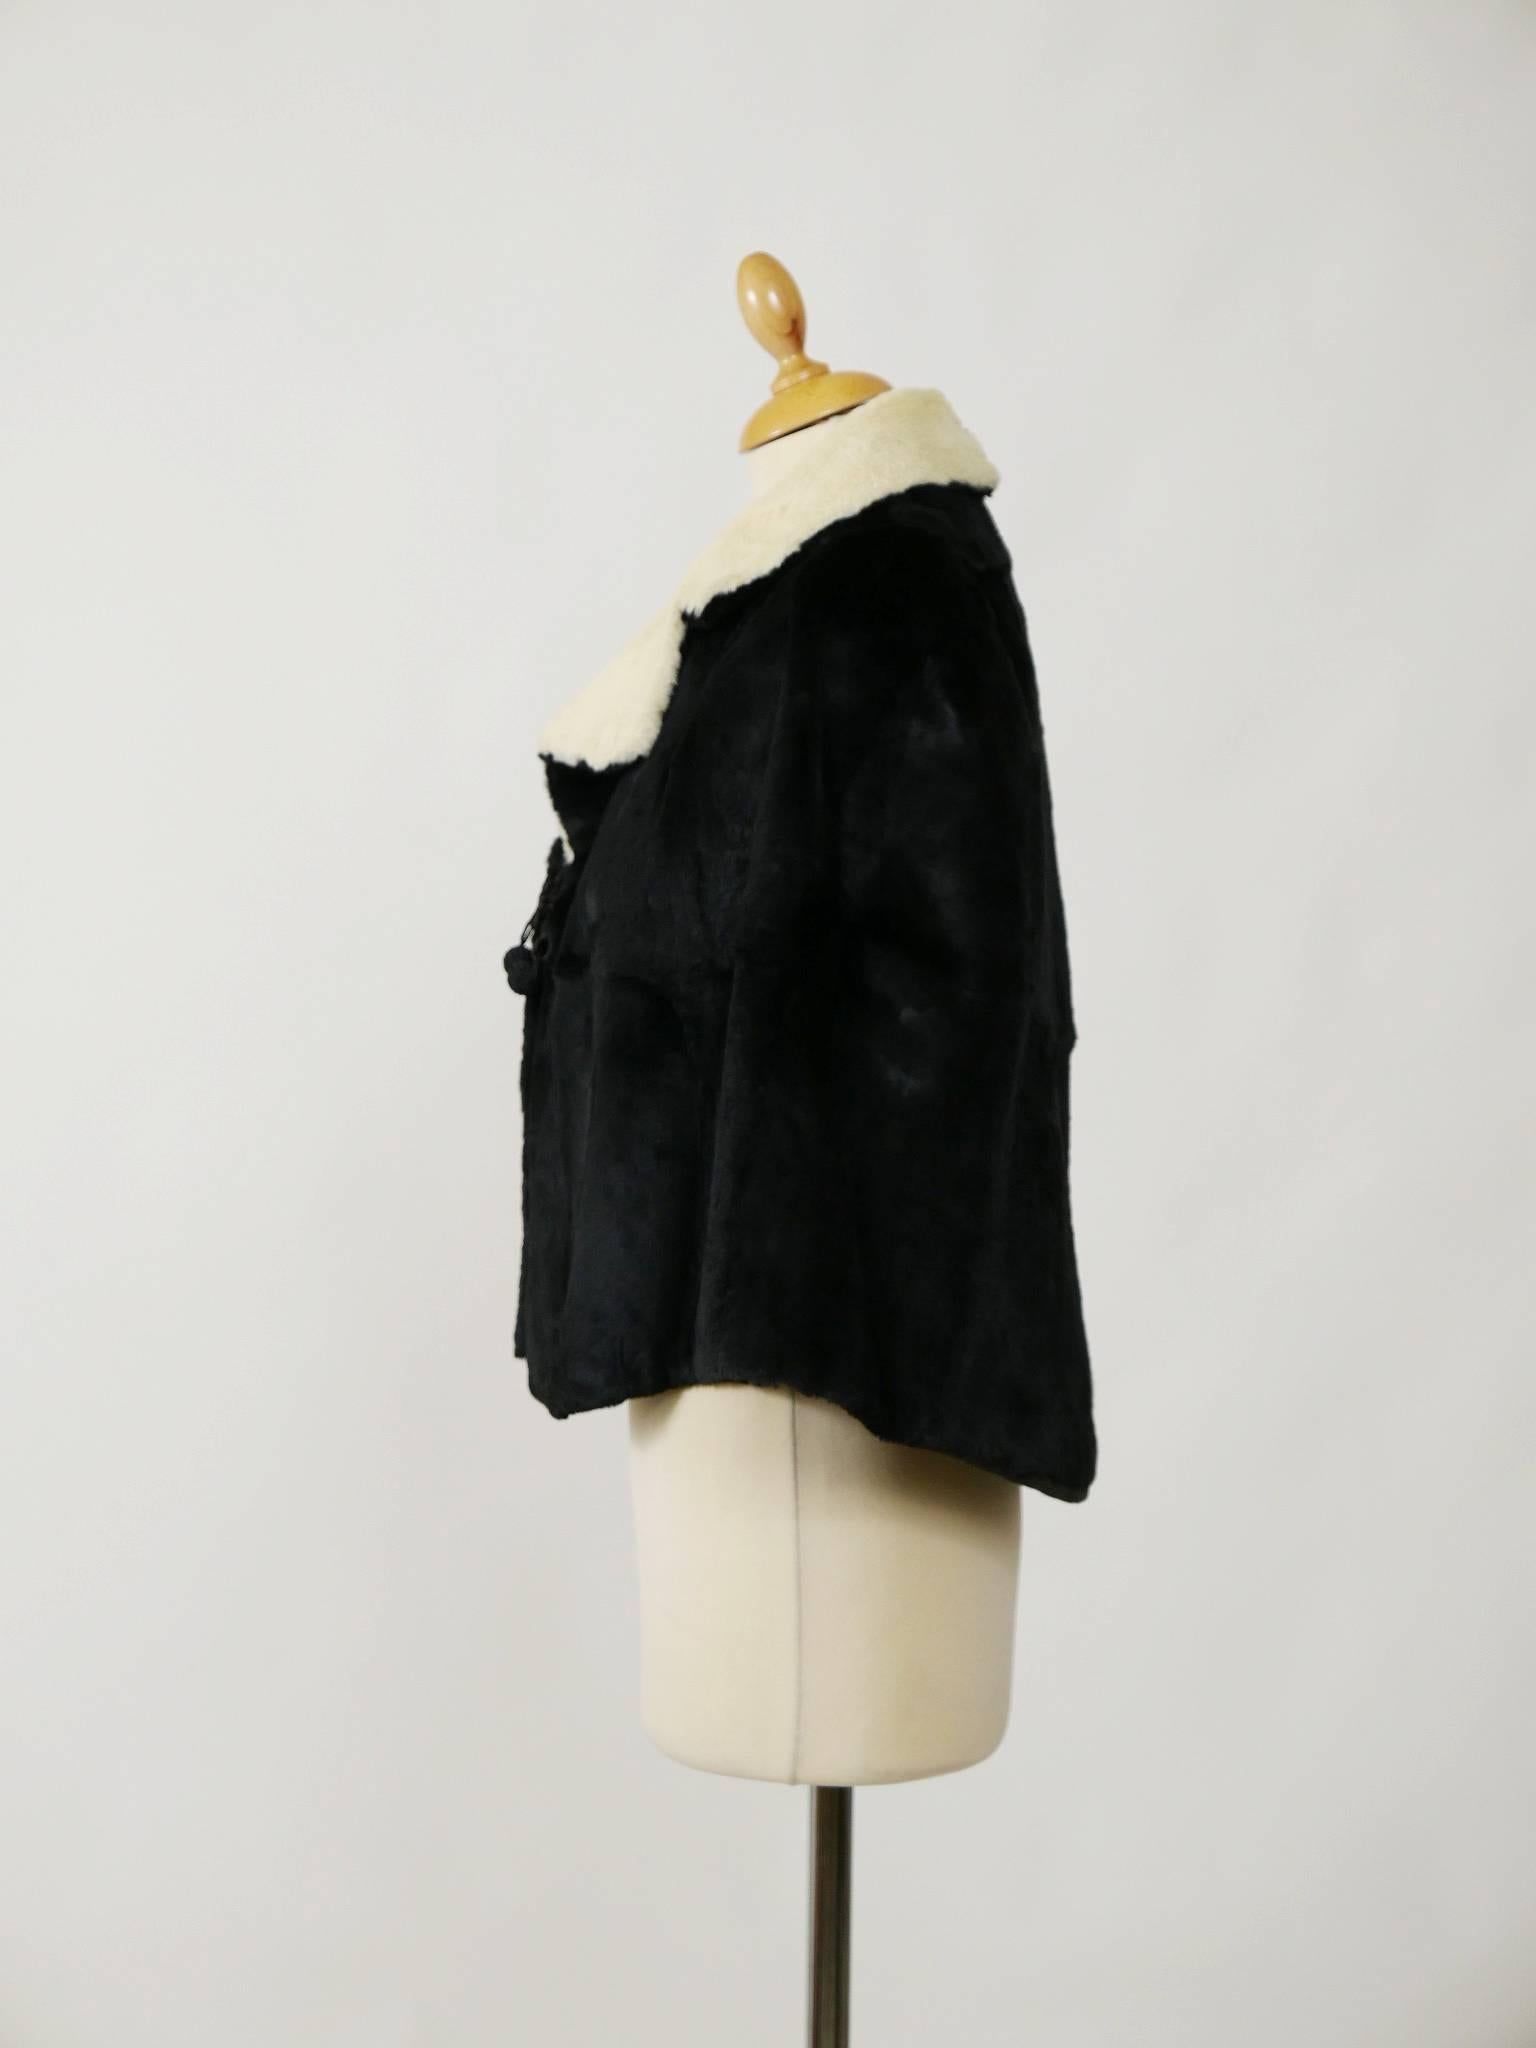 This gorgeous 1940s cape is in a black and white ermine fur. It has faux chain closure and black lining. 

Good vintage condition

Label: KAUFER'S FURRIERS - NEWARK
Fabric: ermine fur
Color: black/white 

Measurement:
Estimated size